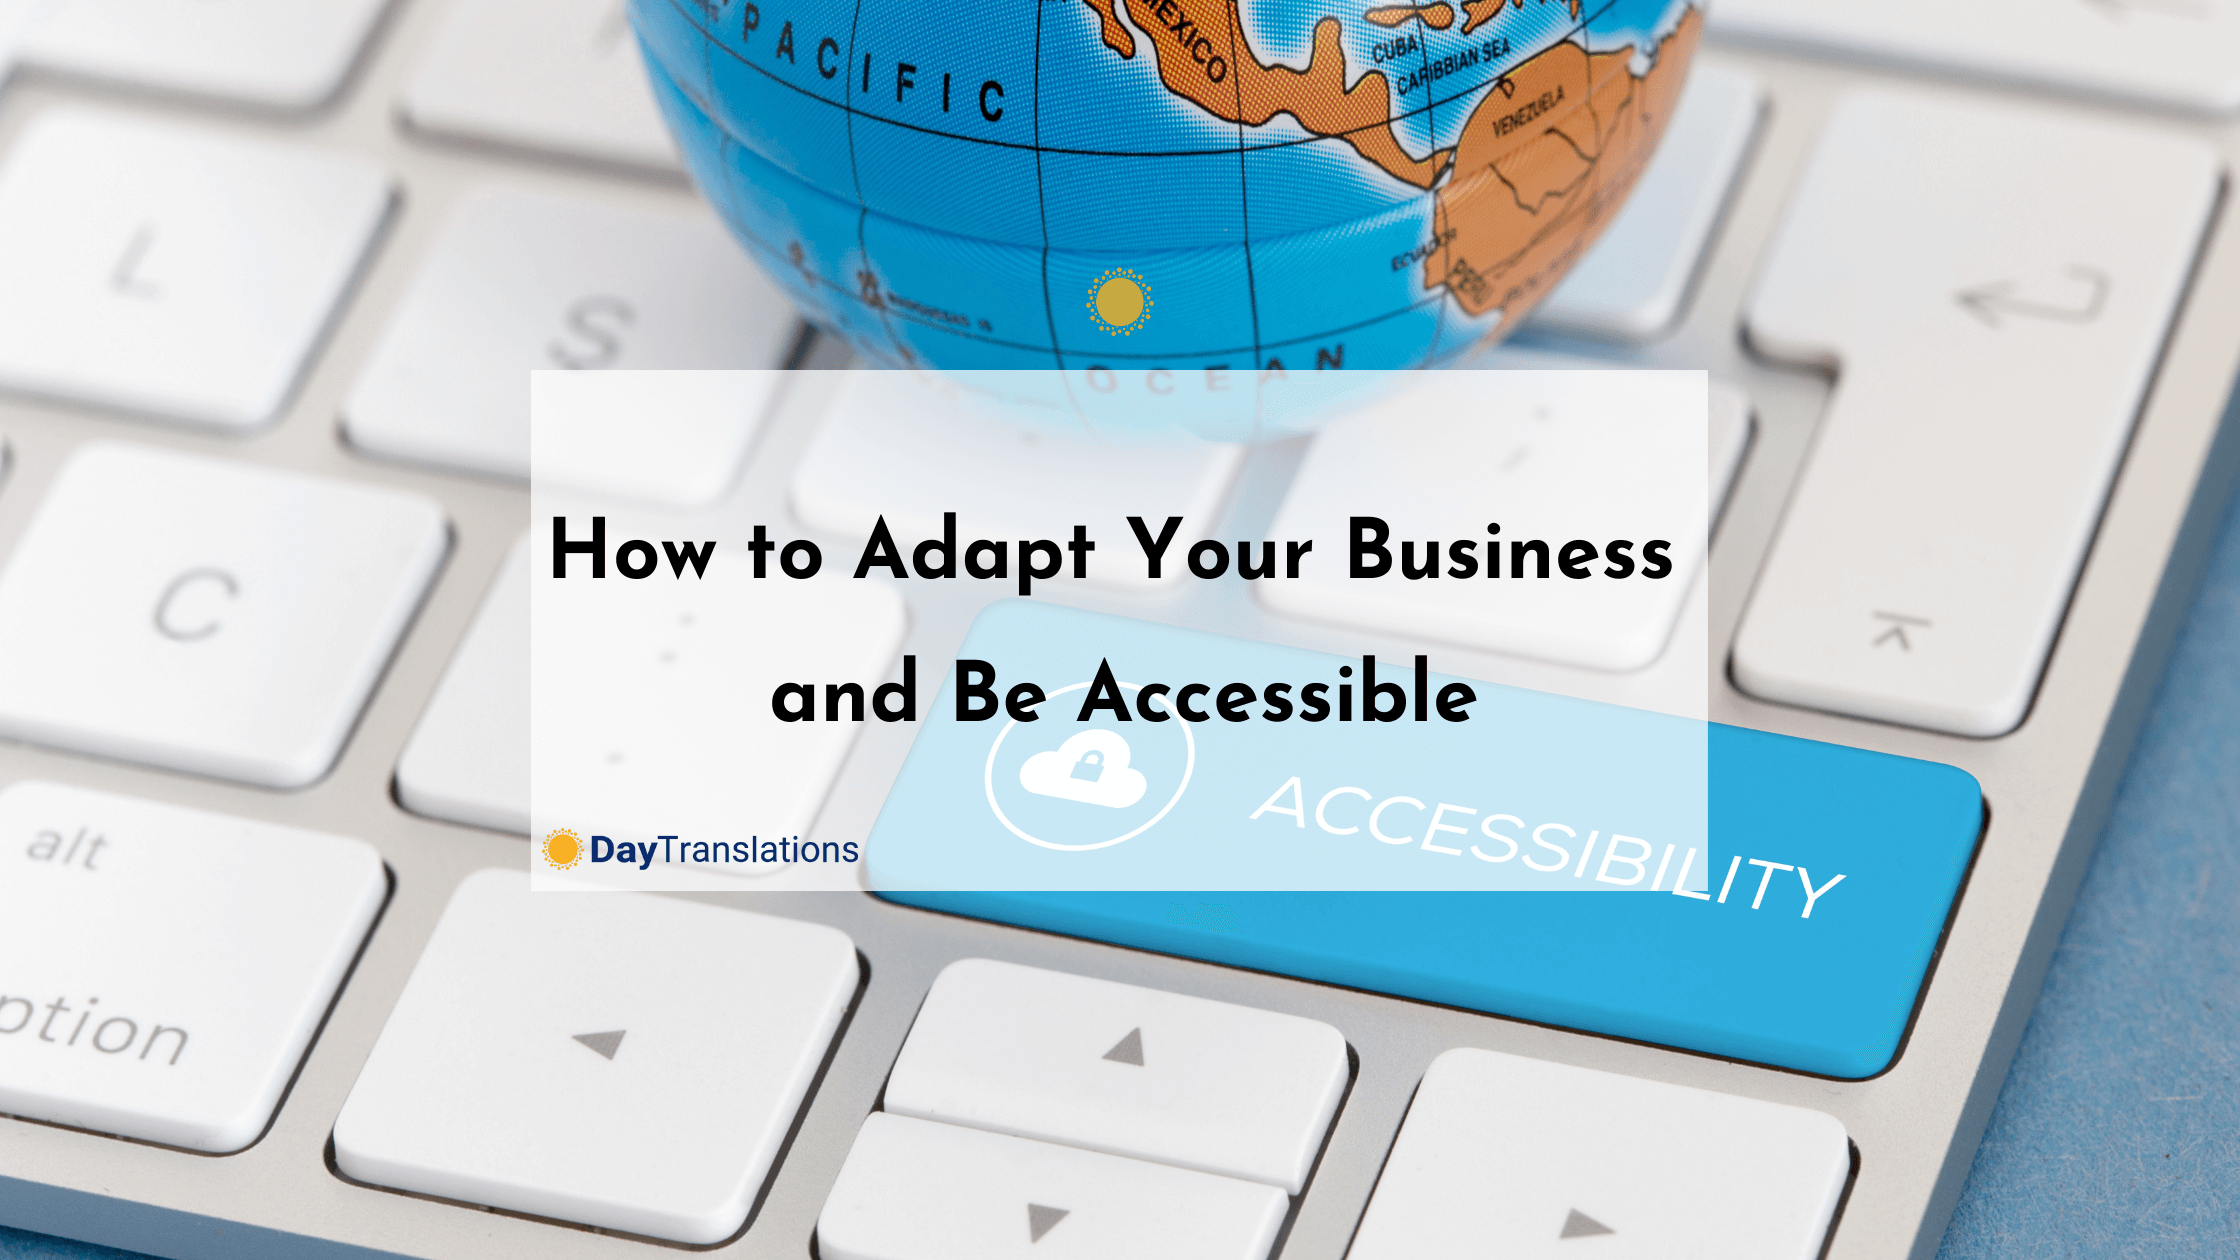 How to Adapt Your Business and Be Accessible